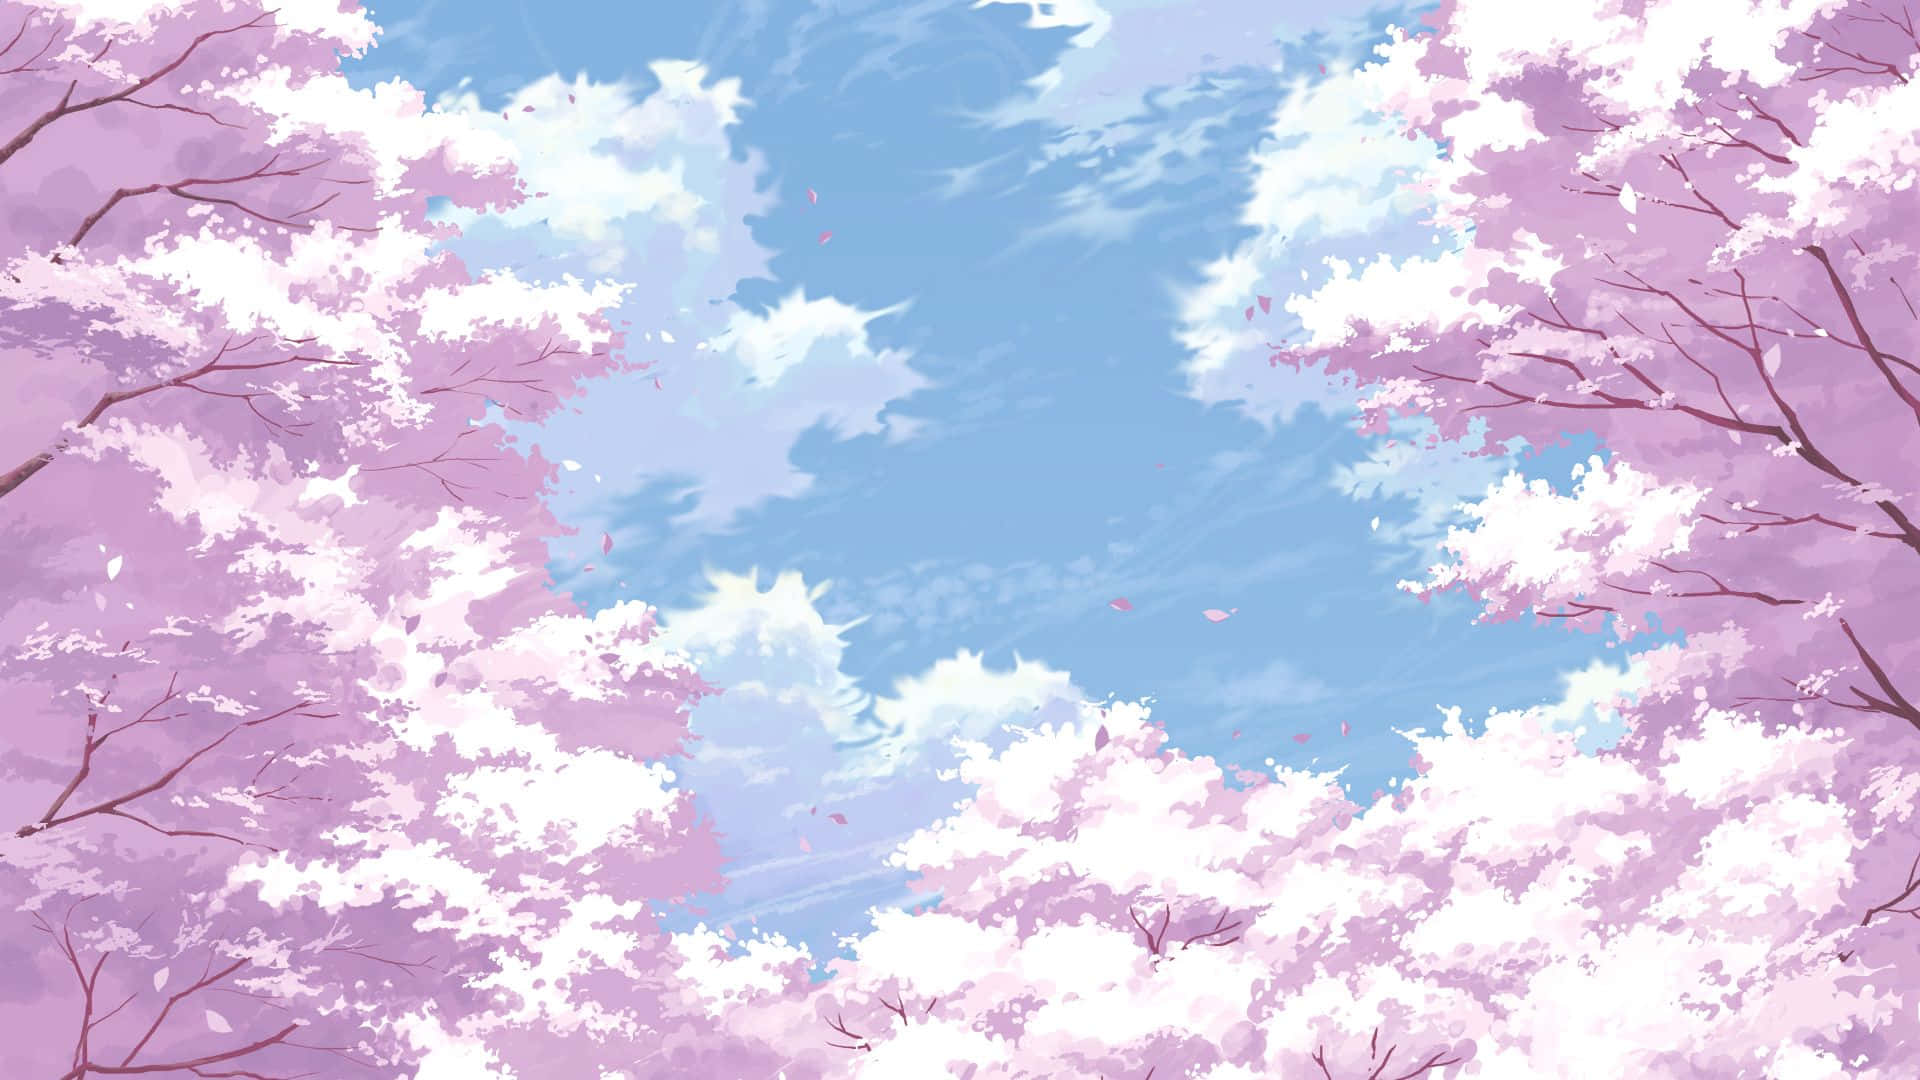 A Painting Of Pink Trees With Clouds In The Sky